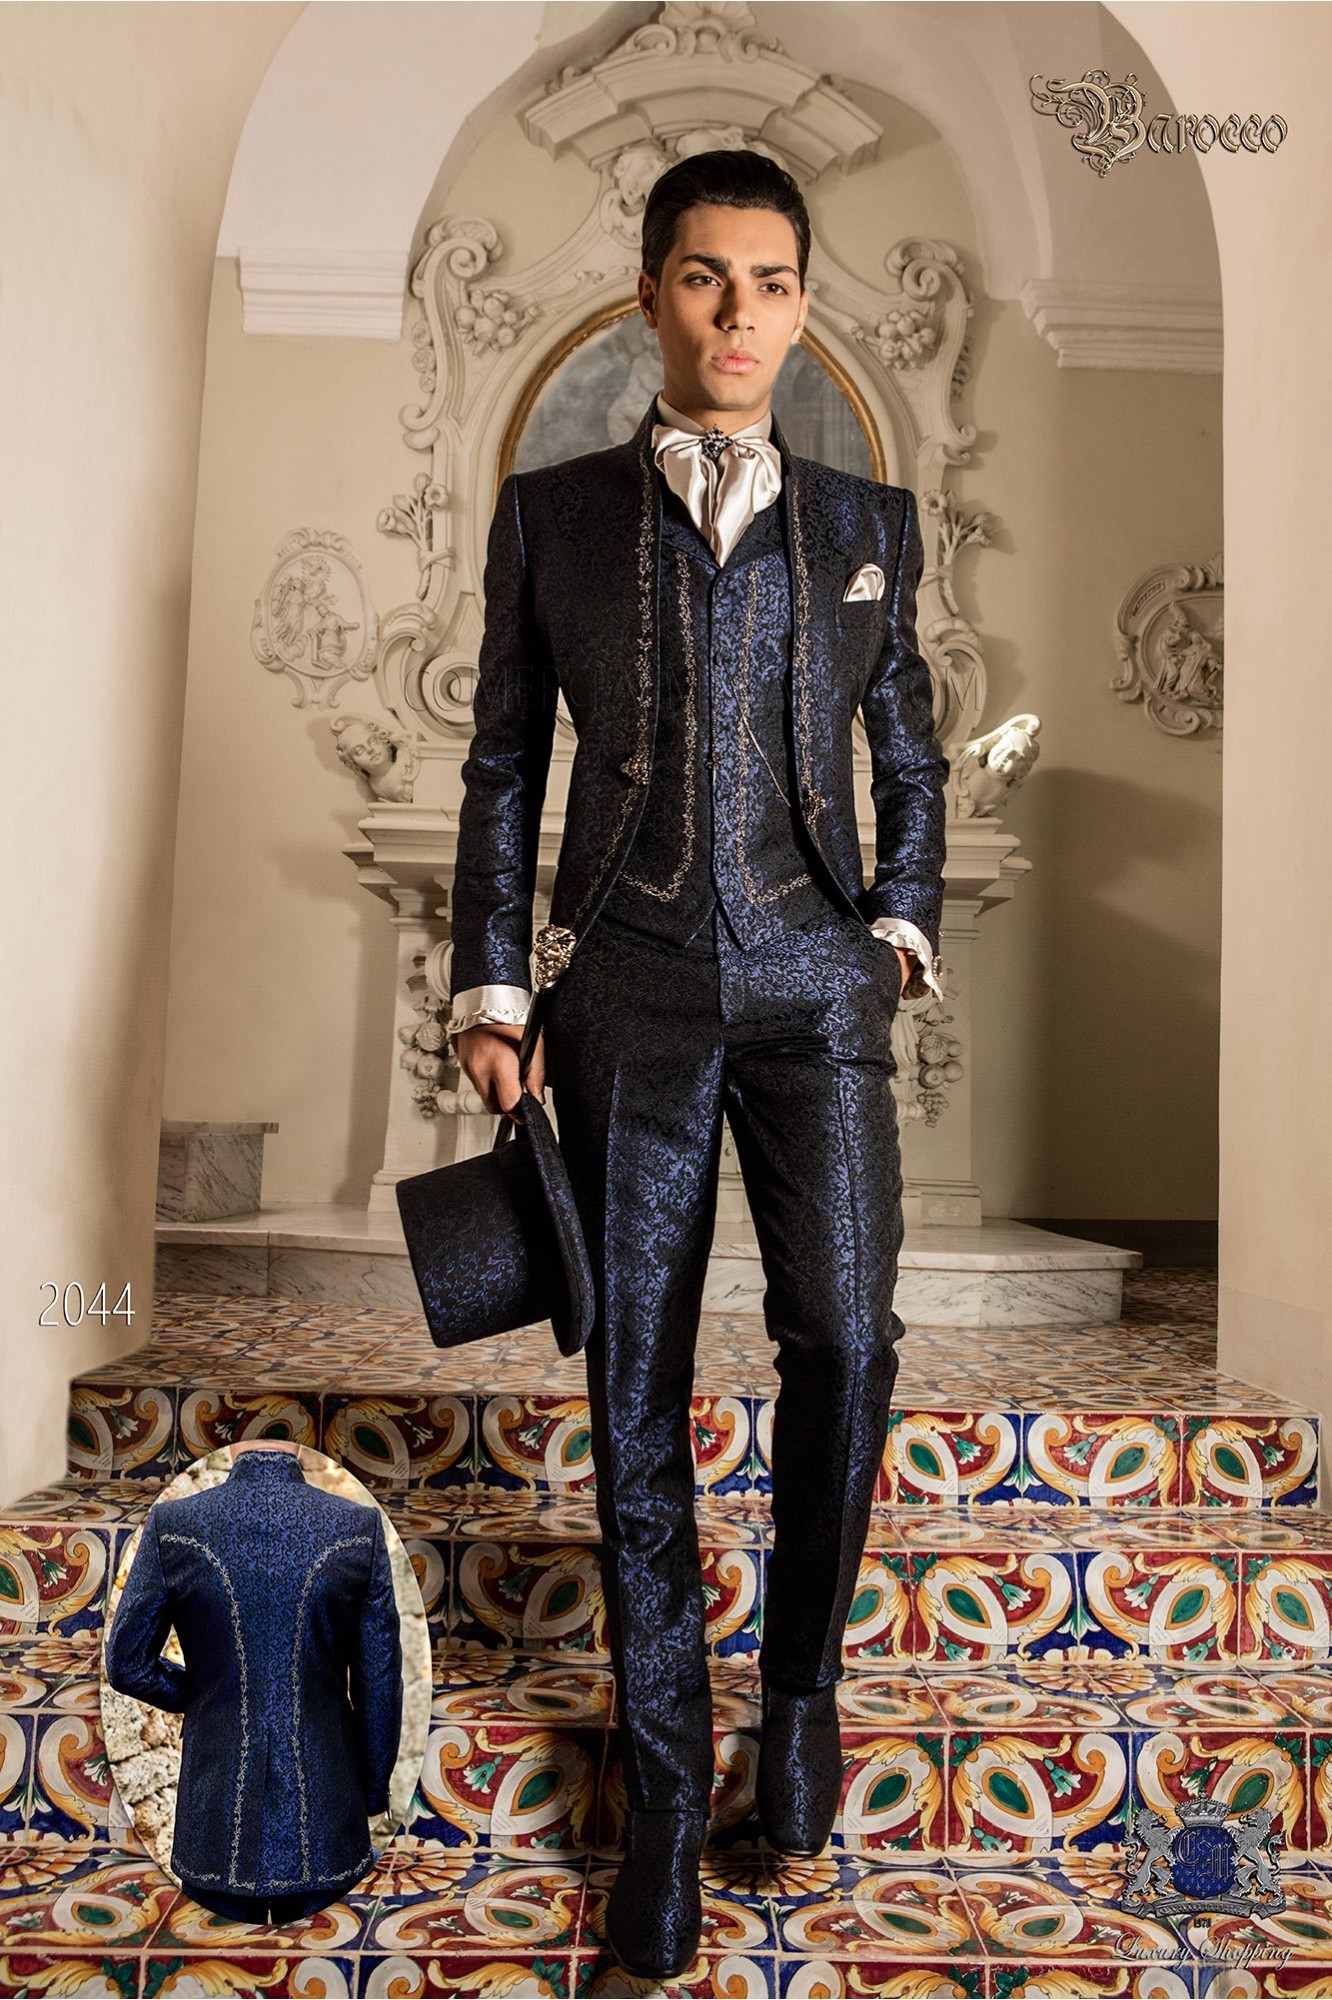 vintage mao collar frock coat in blue jacquard fabric with silver embroidery and crystal clasp model 2044 Mario Moyano